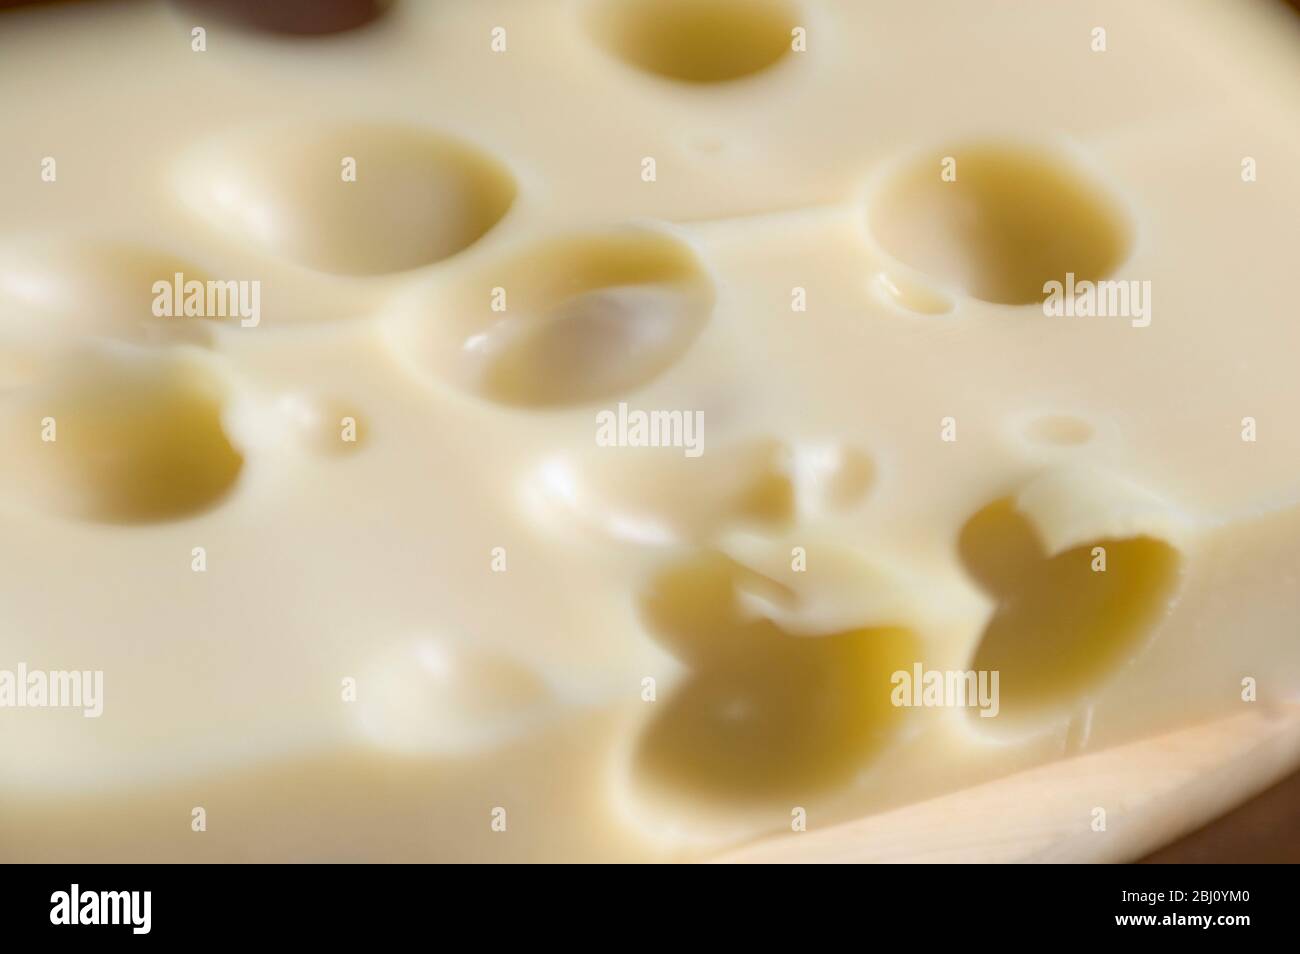 Slab of Emmental cheese shot with lensbabies lens for short depth of field effect - Stock Photo